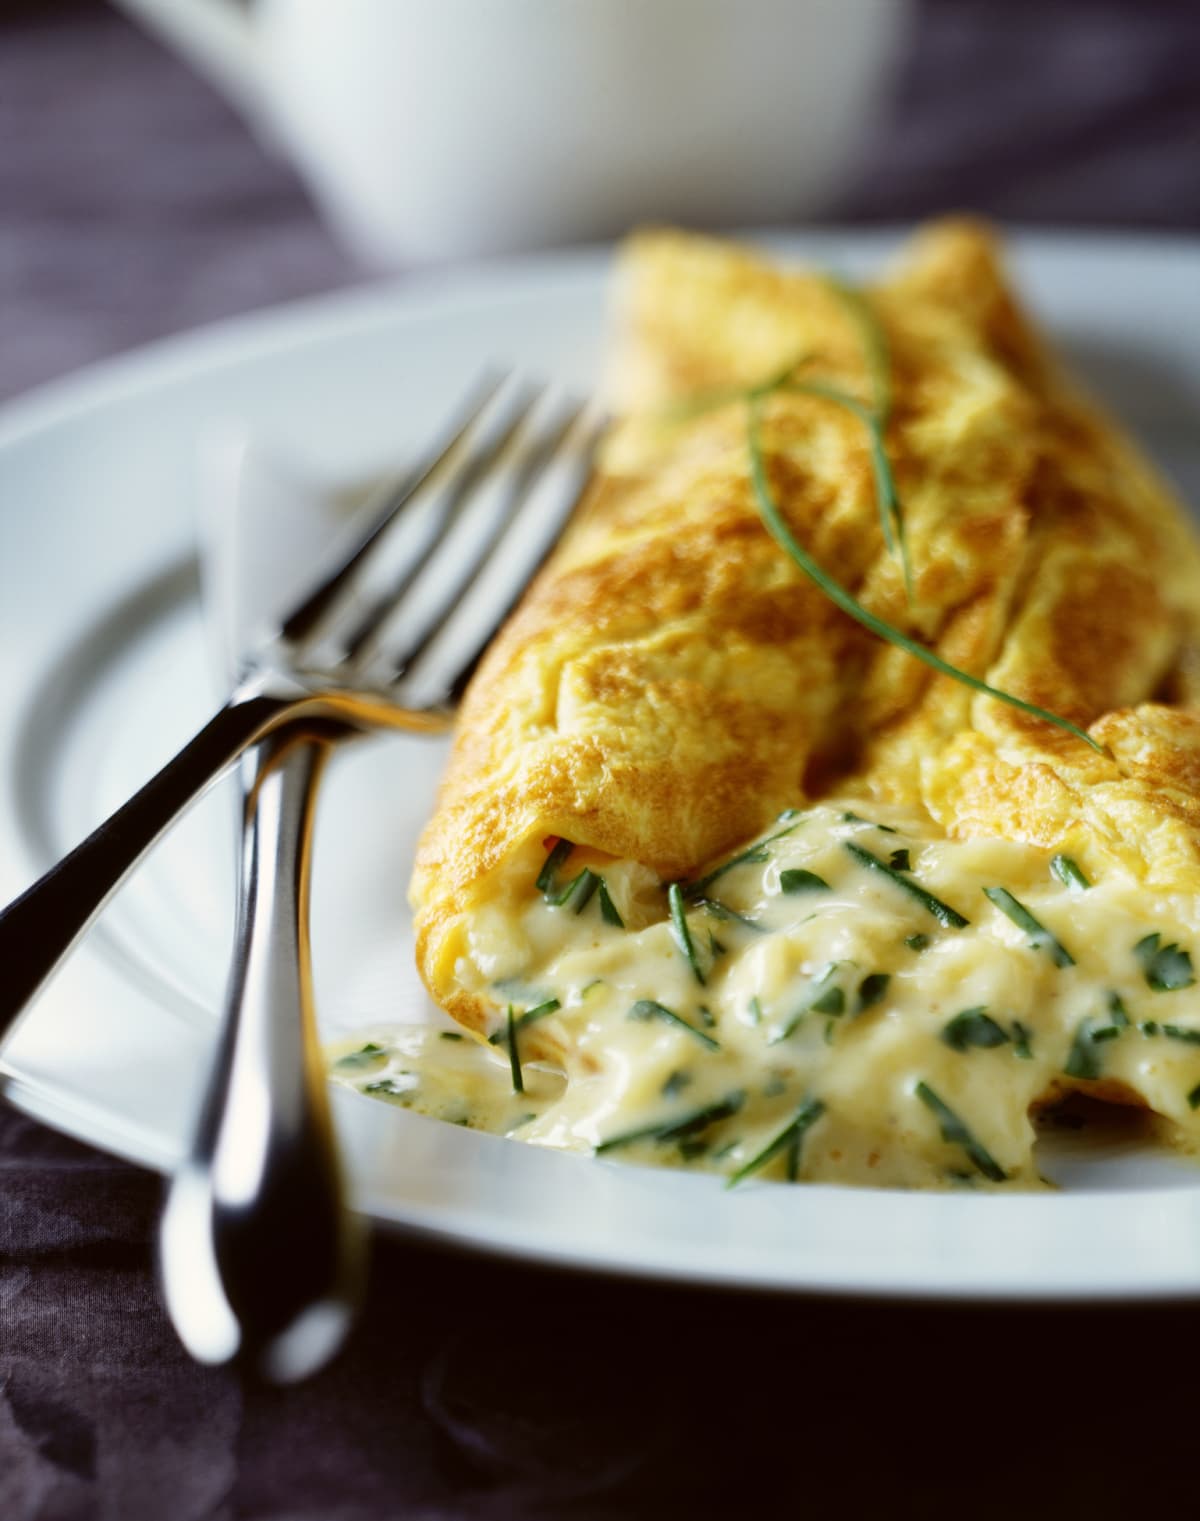 Cheesy omelet on a plate with a fork